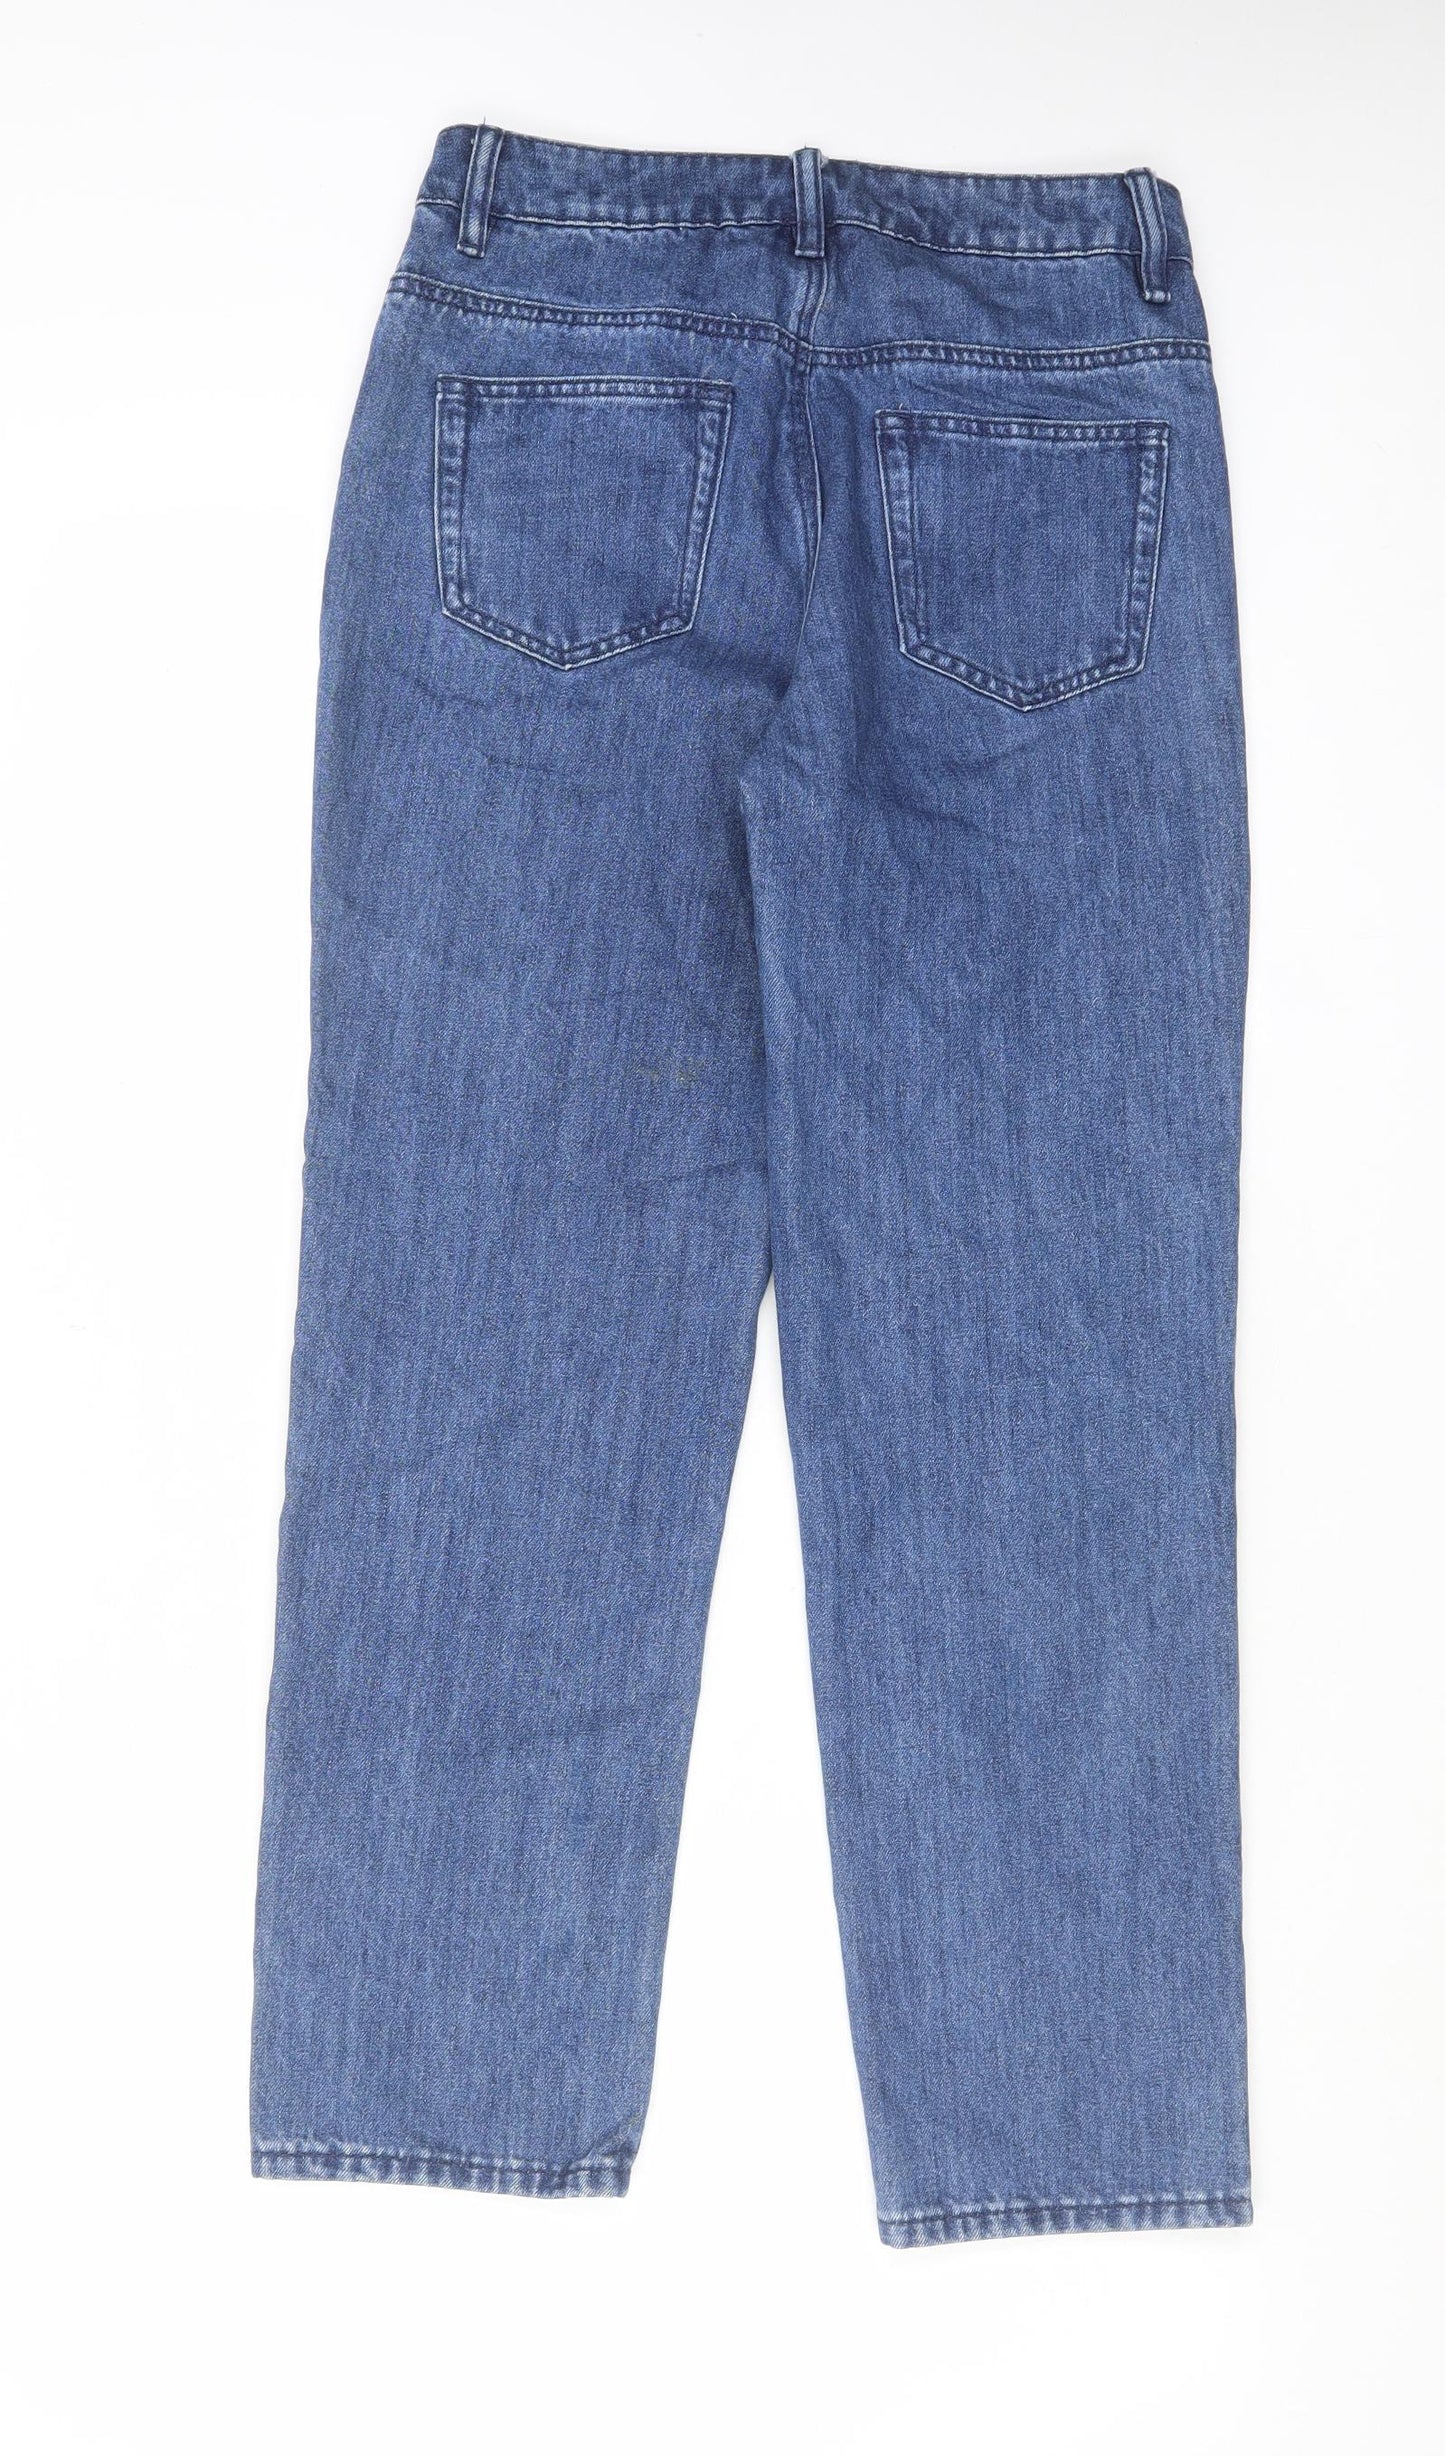 Oliver Bonas Womens Blue Cotton Straight Jeans Size 8 L27 in Regular Zip